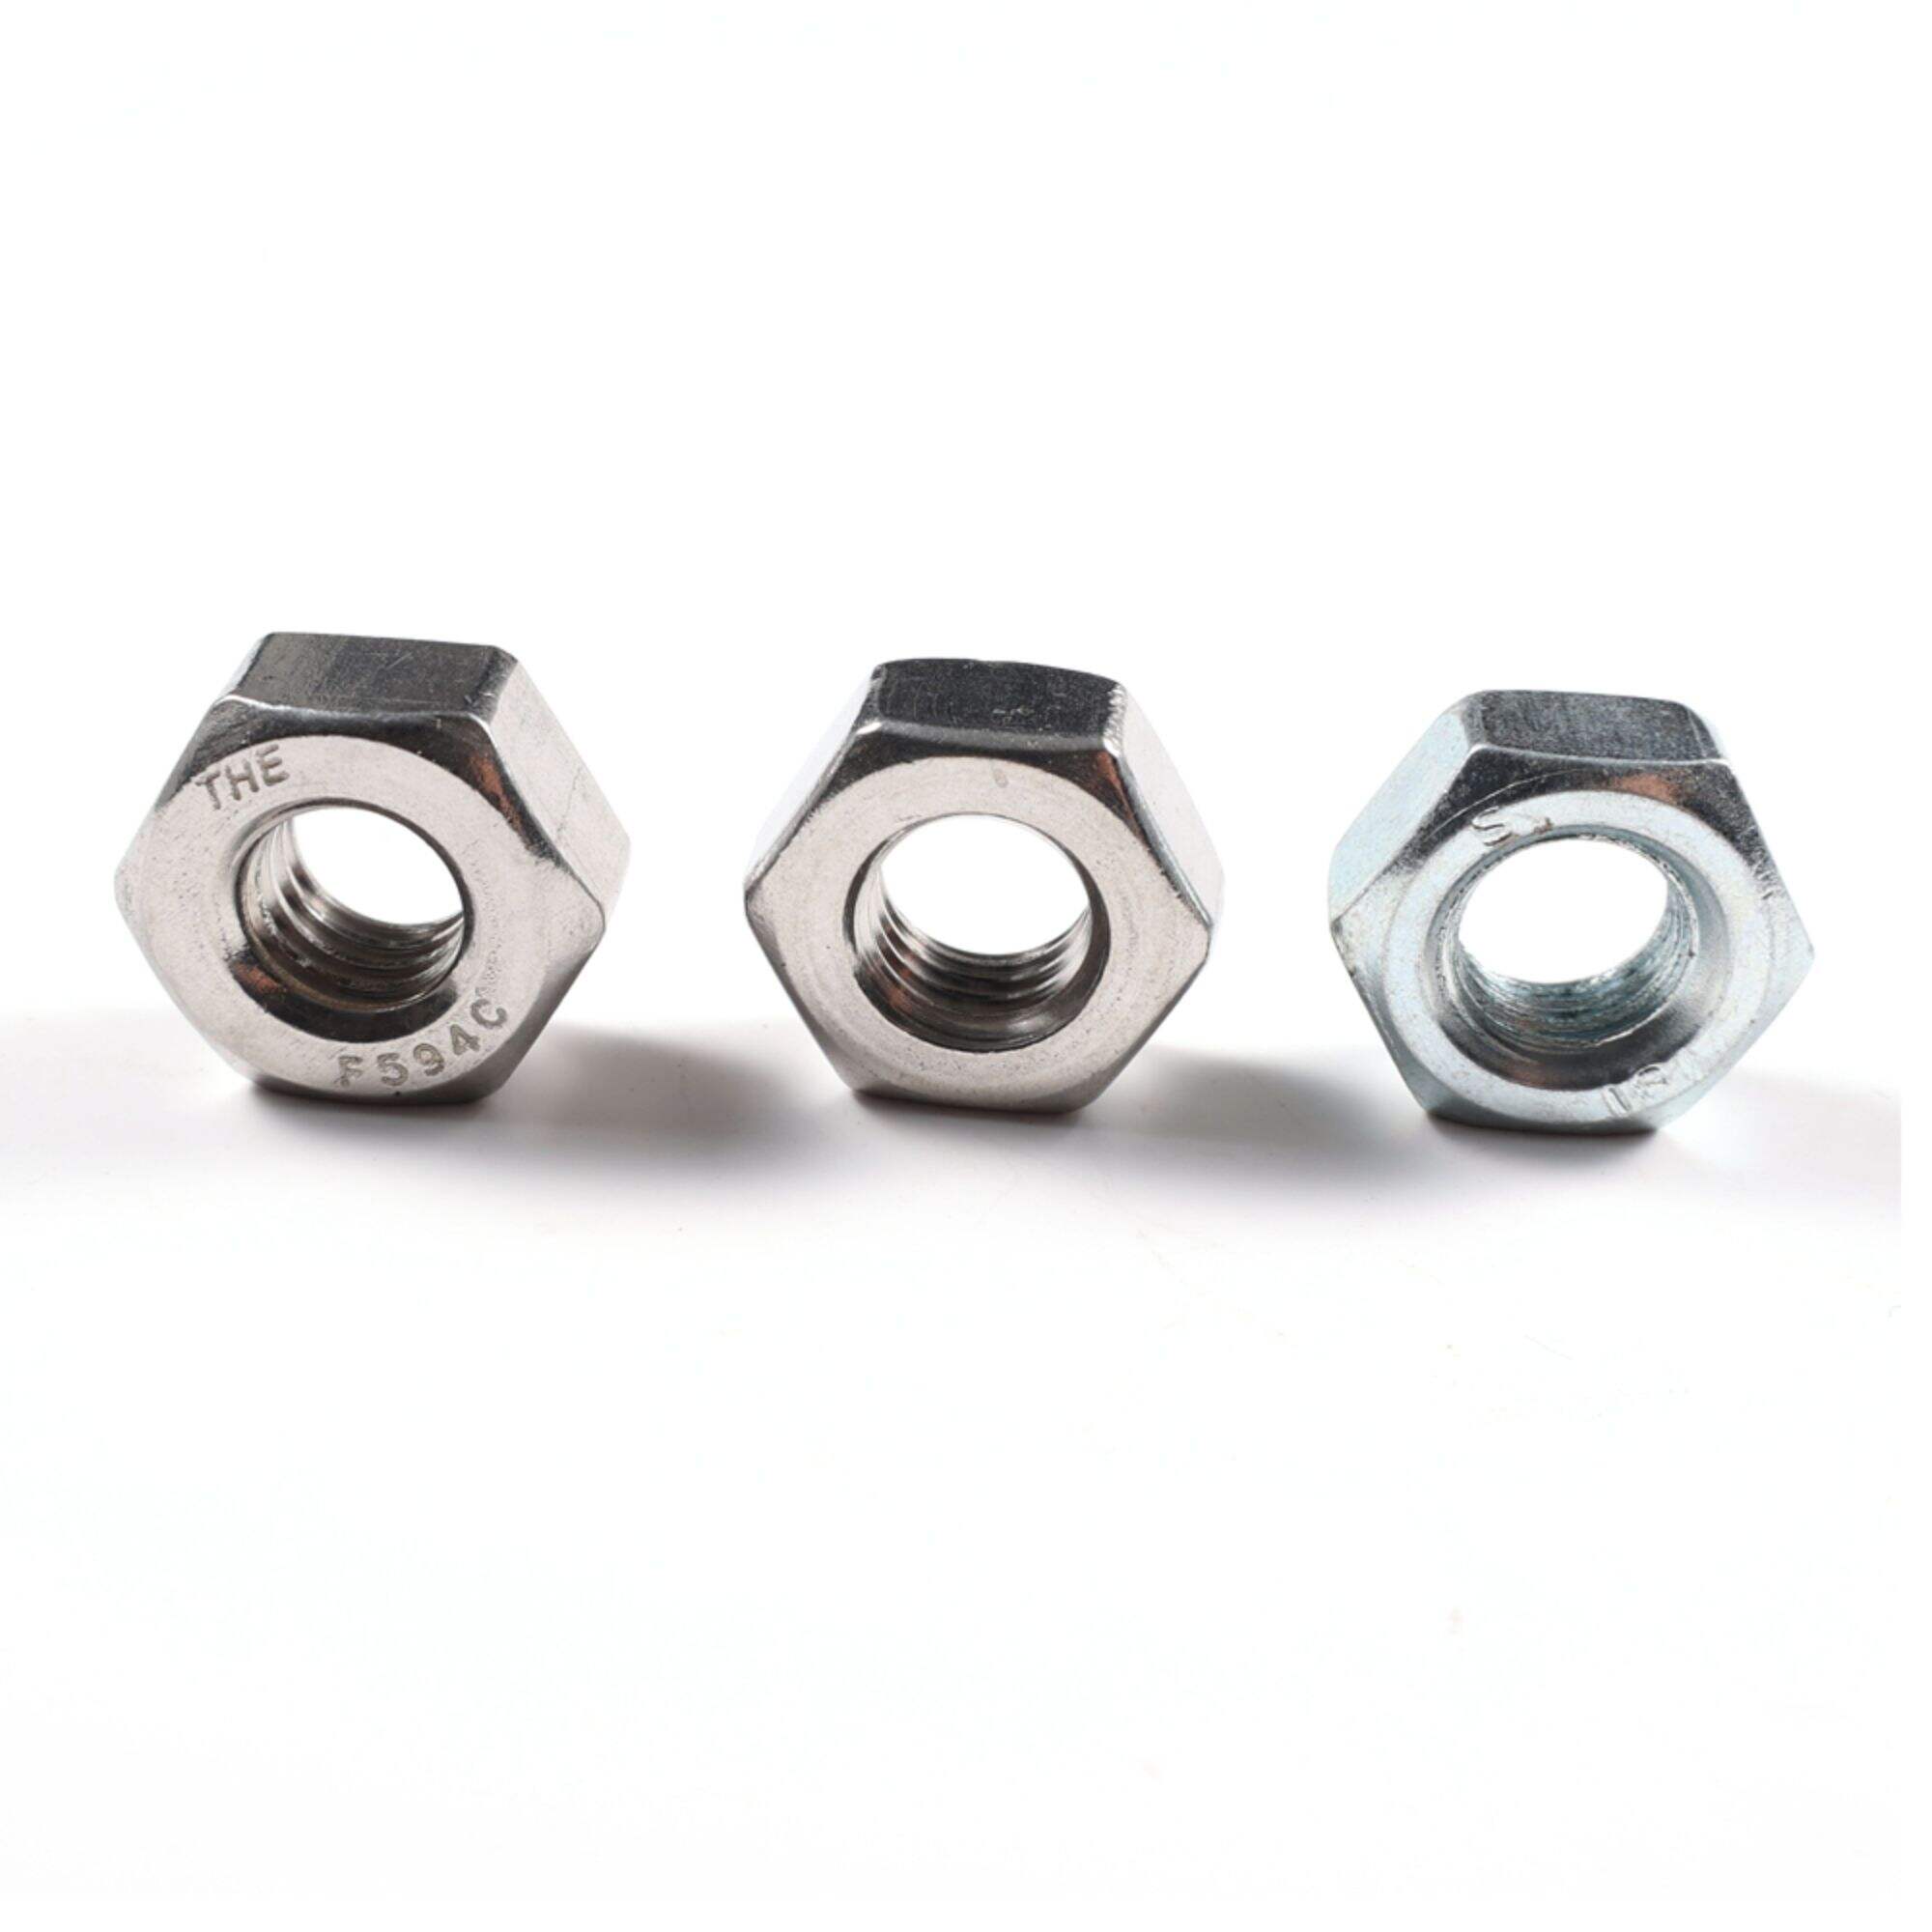 Custom Din934 GB52 Hex Nut And Bolt M3 M5 M6 Stainless Steel 304 316 Flat Head Hex Nuts